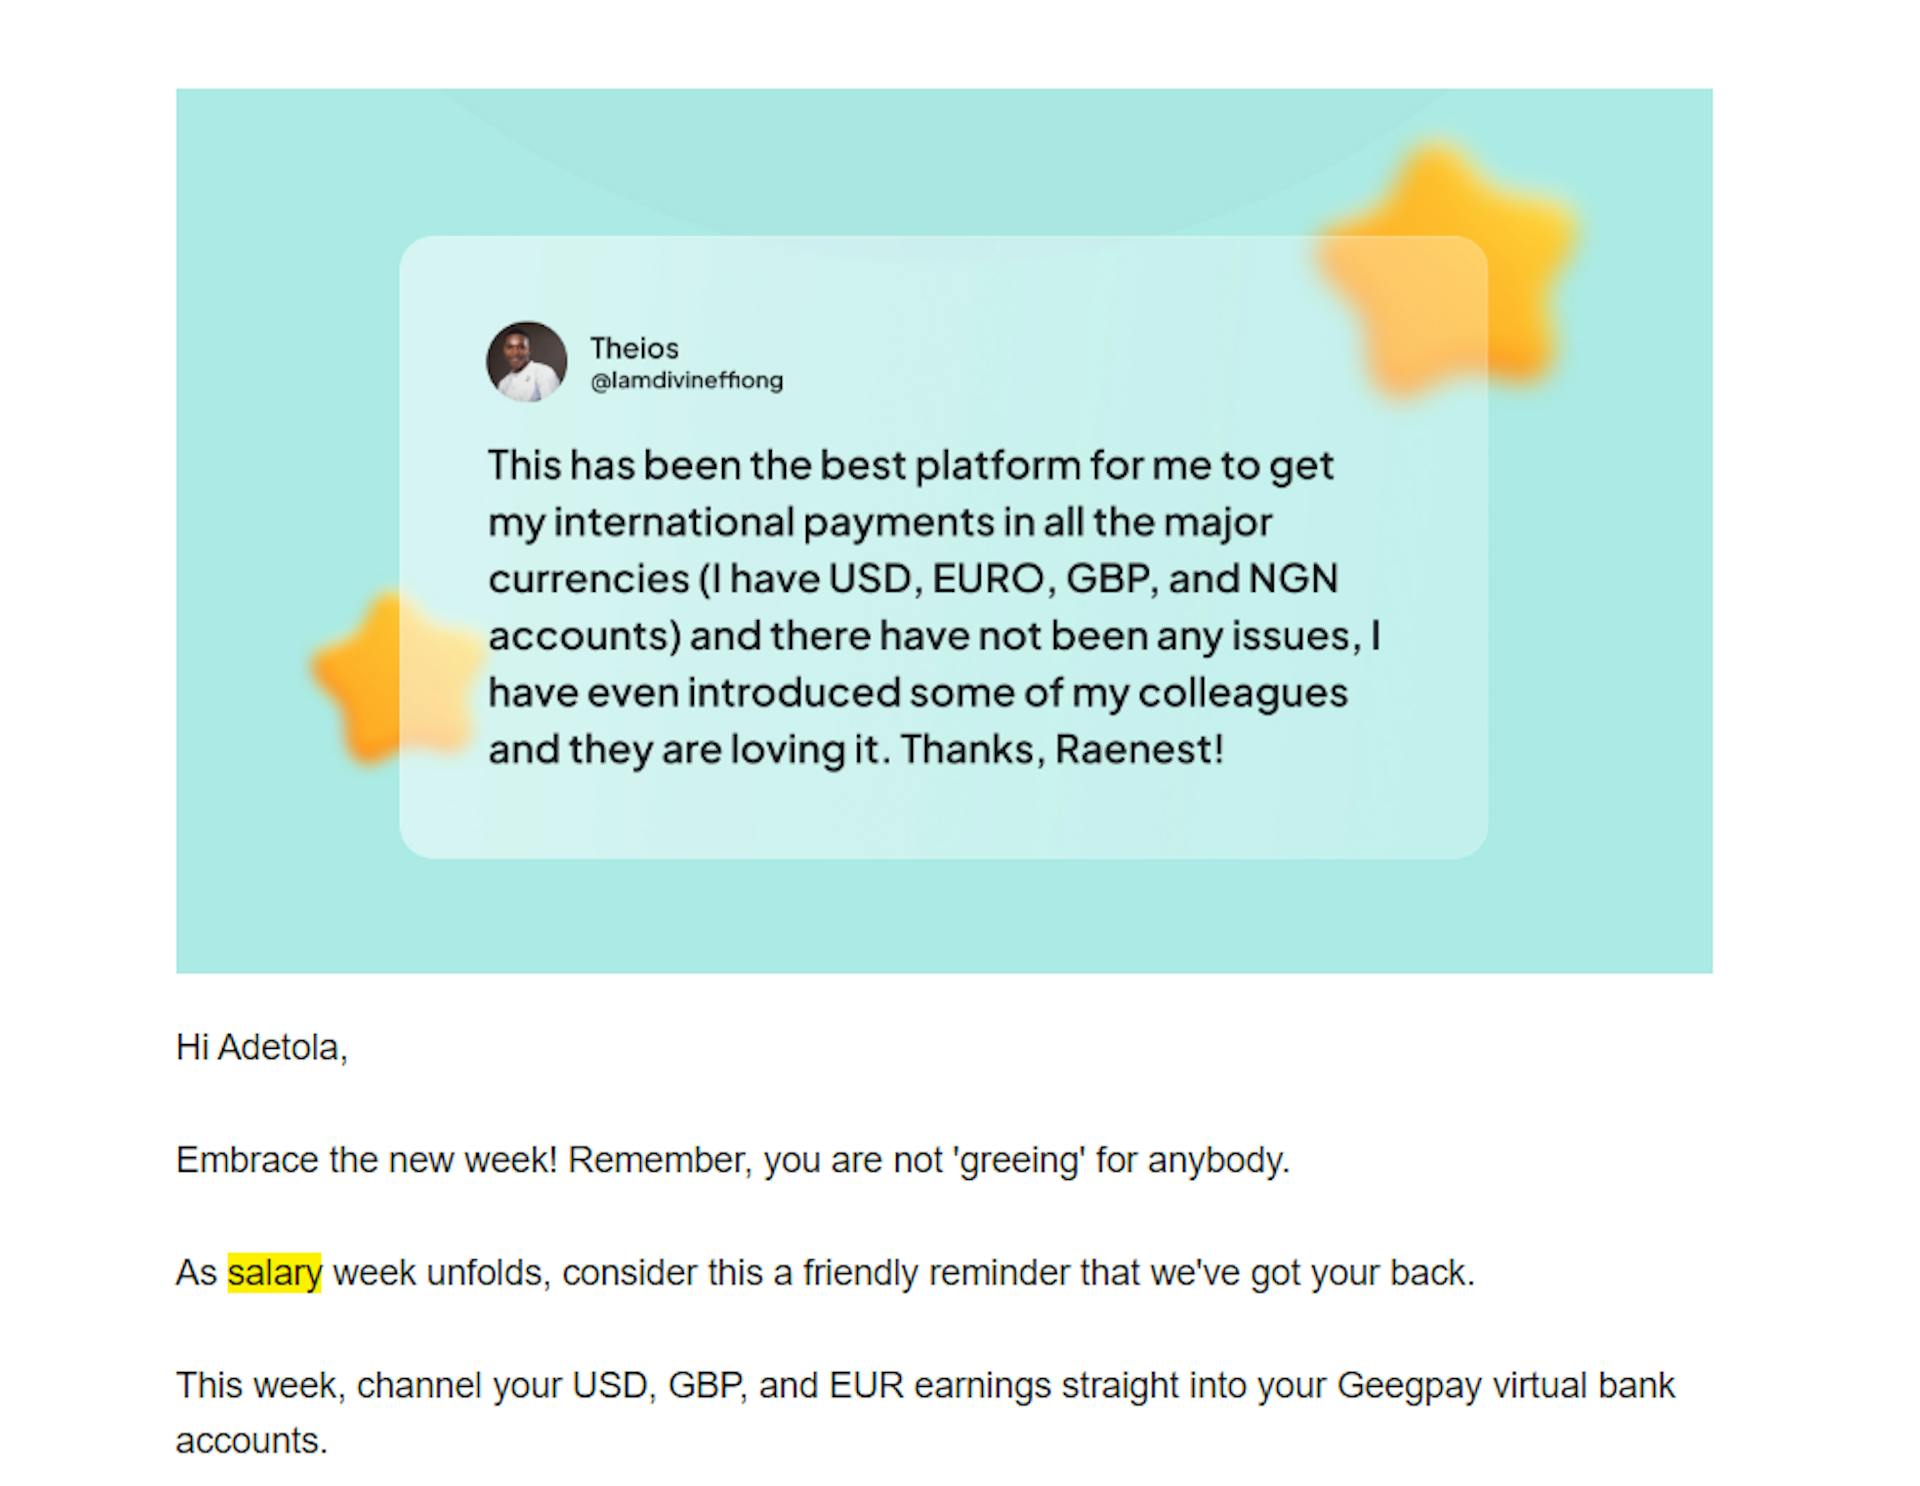 A public review from a Geegpay user shared by the company in an email newsletter. 